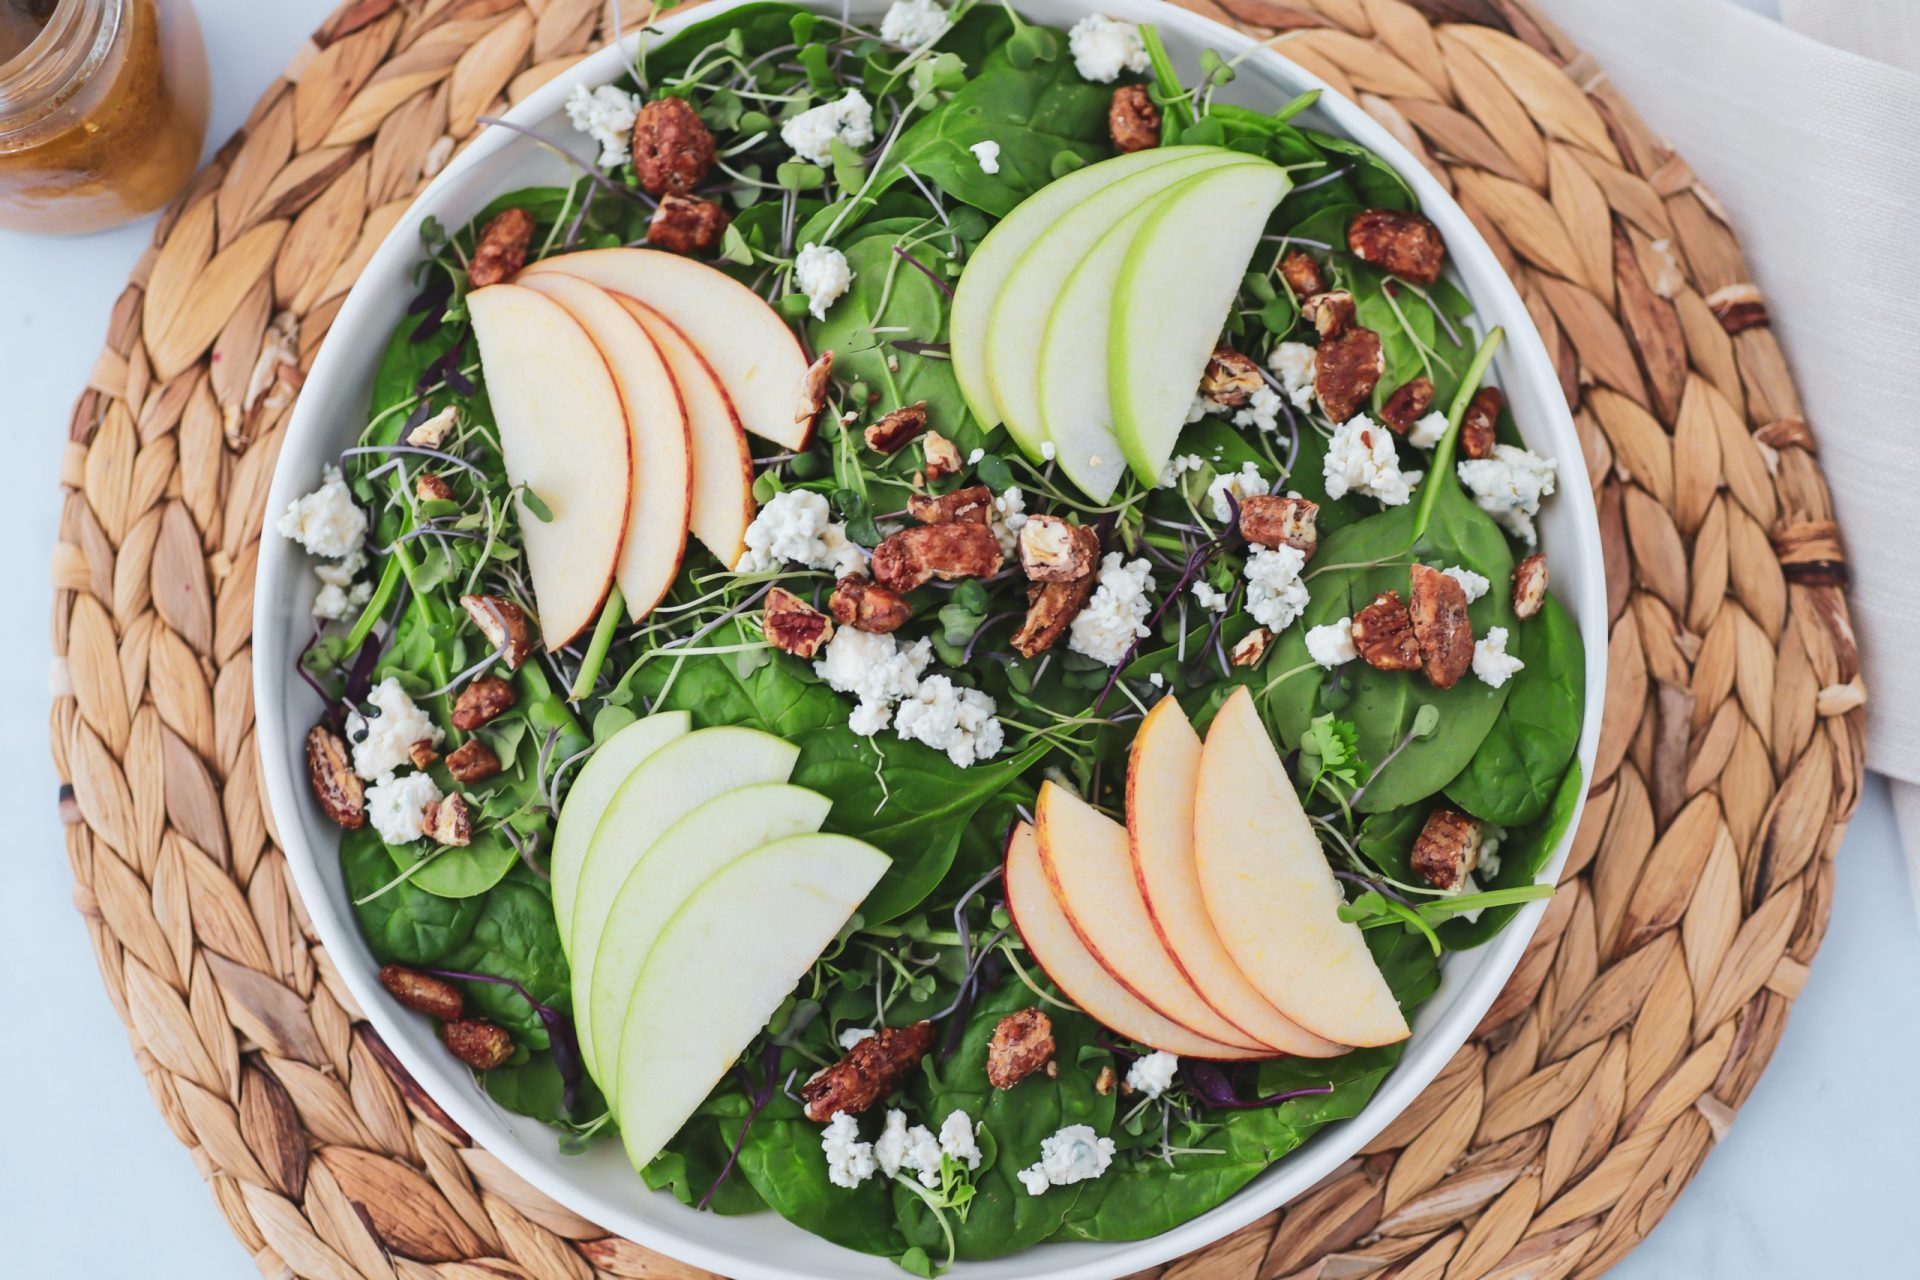 Spinach and Apple Salad with Cider Vinaigrette